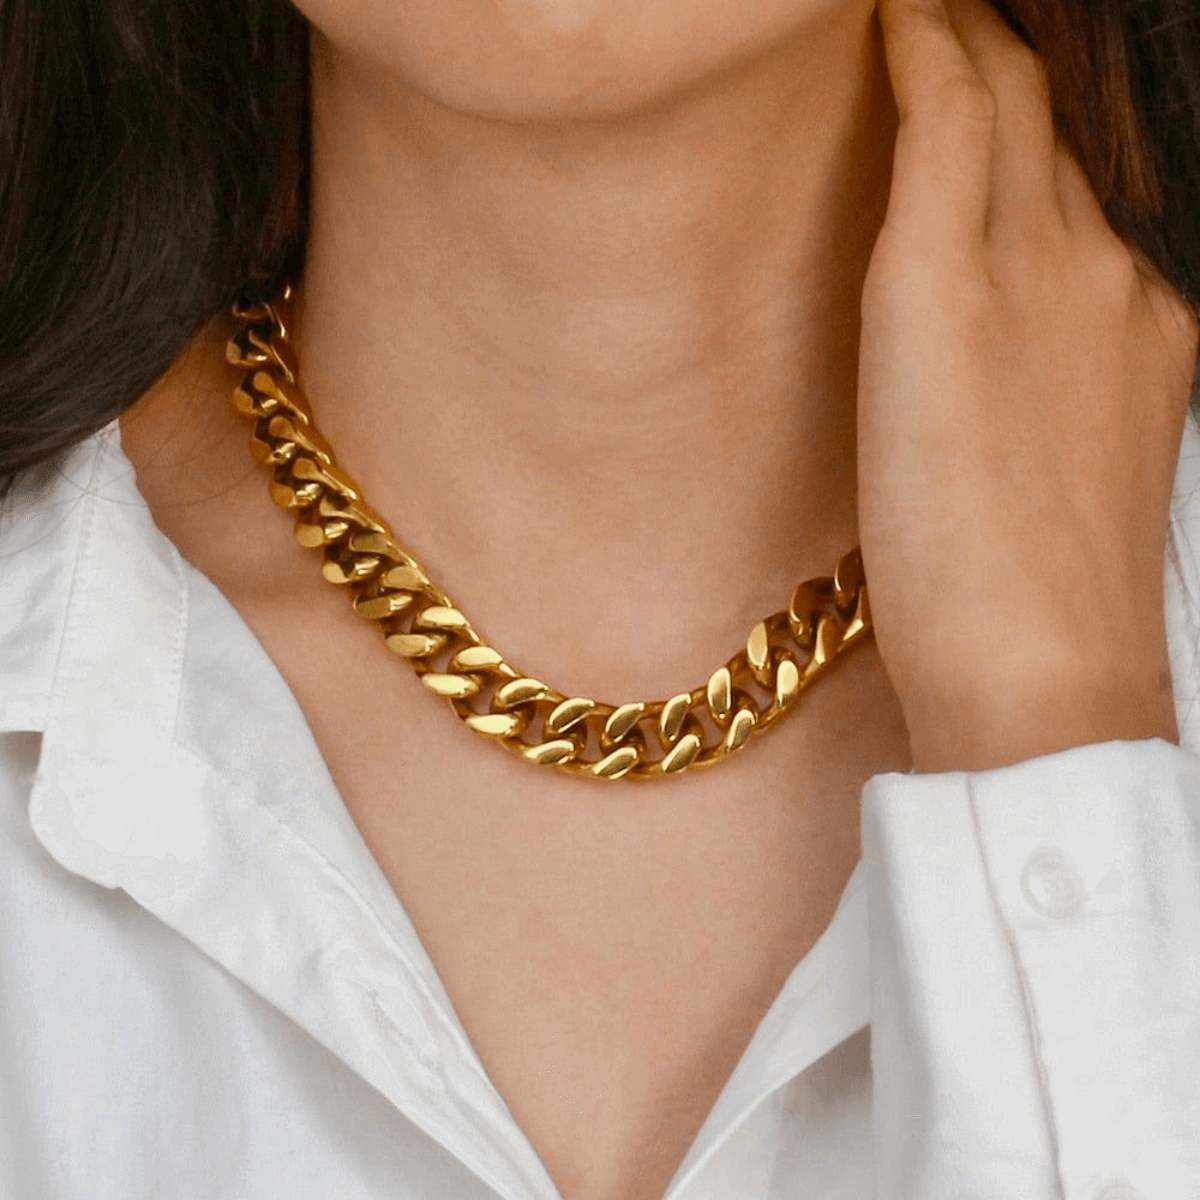 Best Gold Layering Chain Necklaces Bundle Jewelry Gift | Best Aesthetic Yellow Gold Chain Necklace Jewelry Gift for Women, Mother, Wife, Daughter 